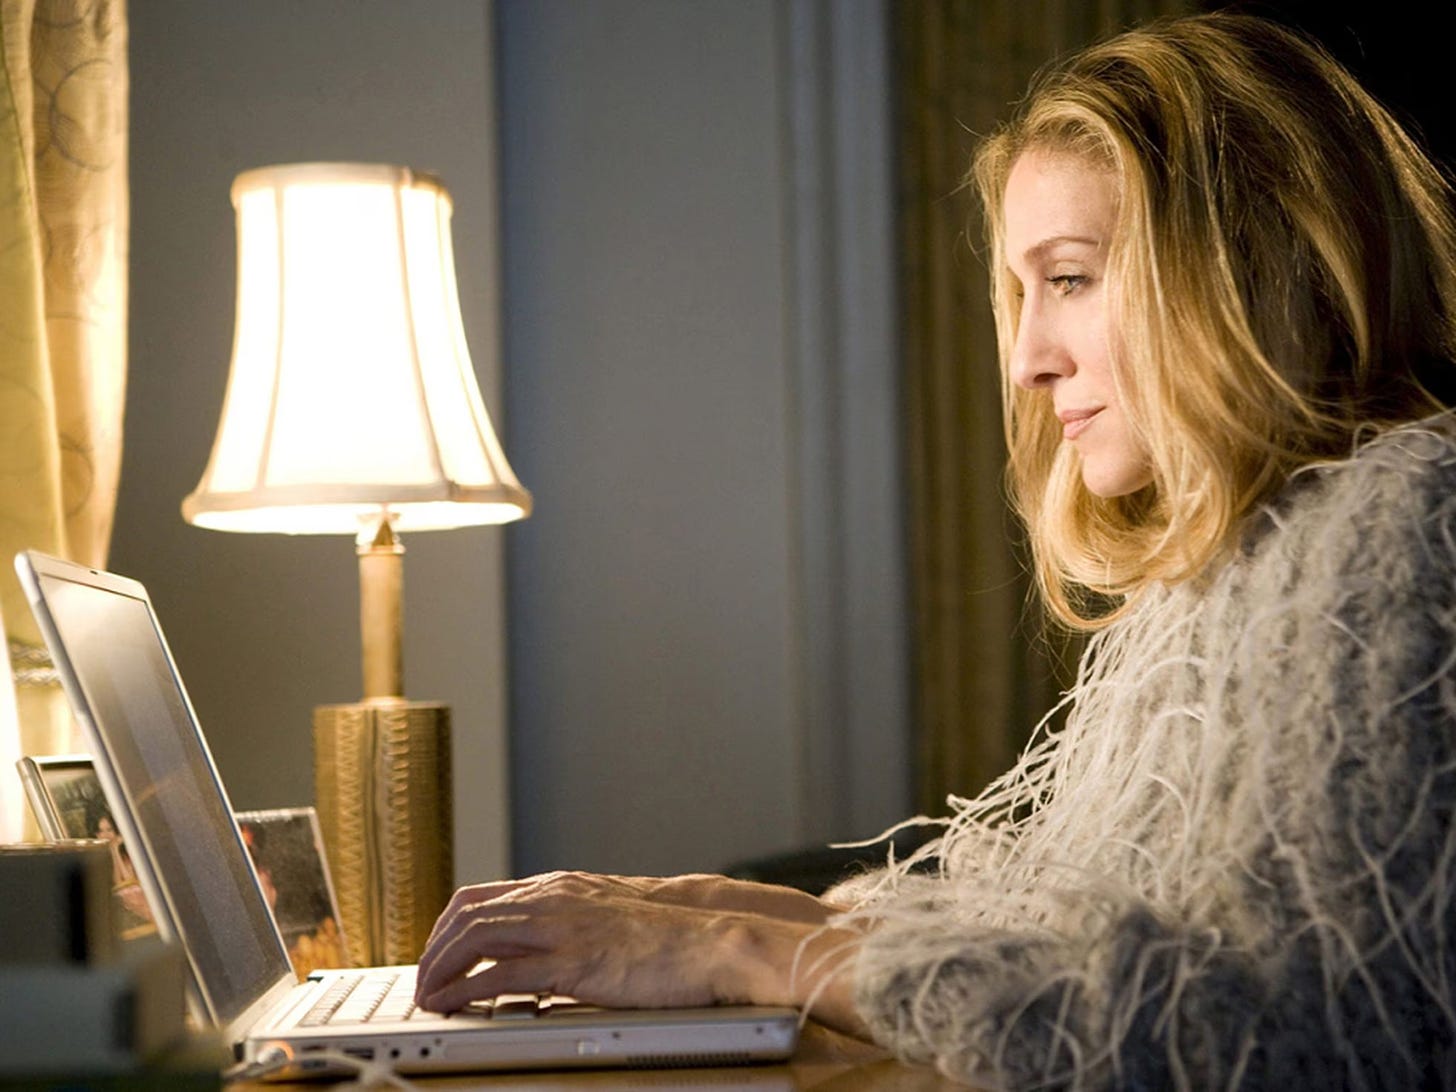 Carrie Bradshaw (Sarah Jessica Parker) sits at a desk typing on a laptop.